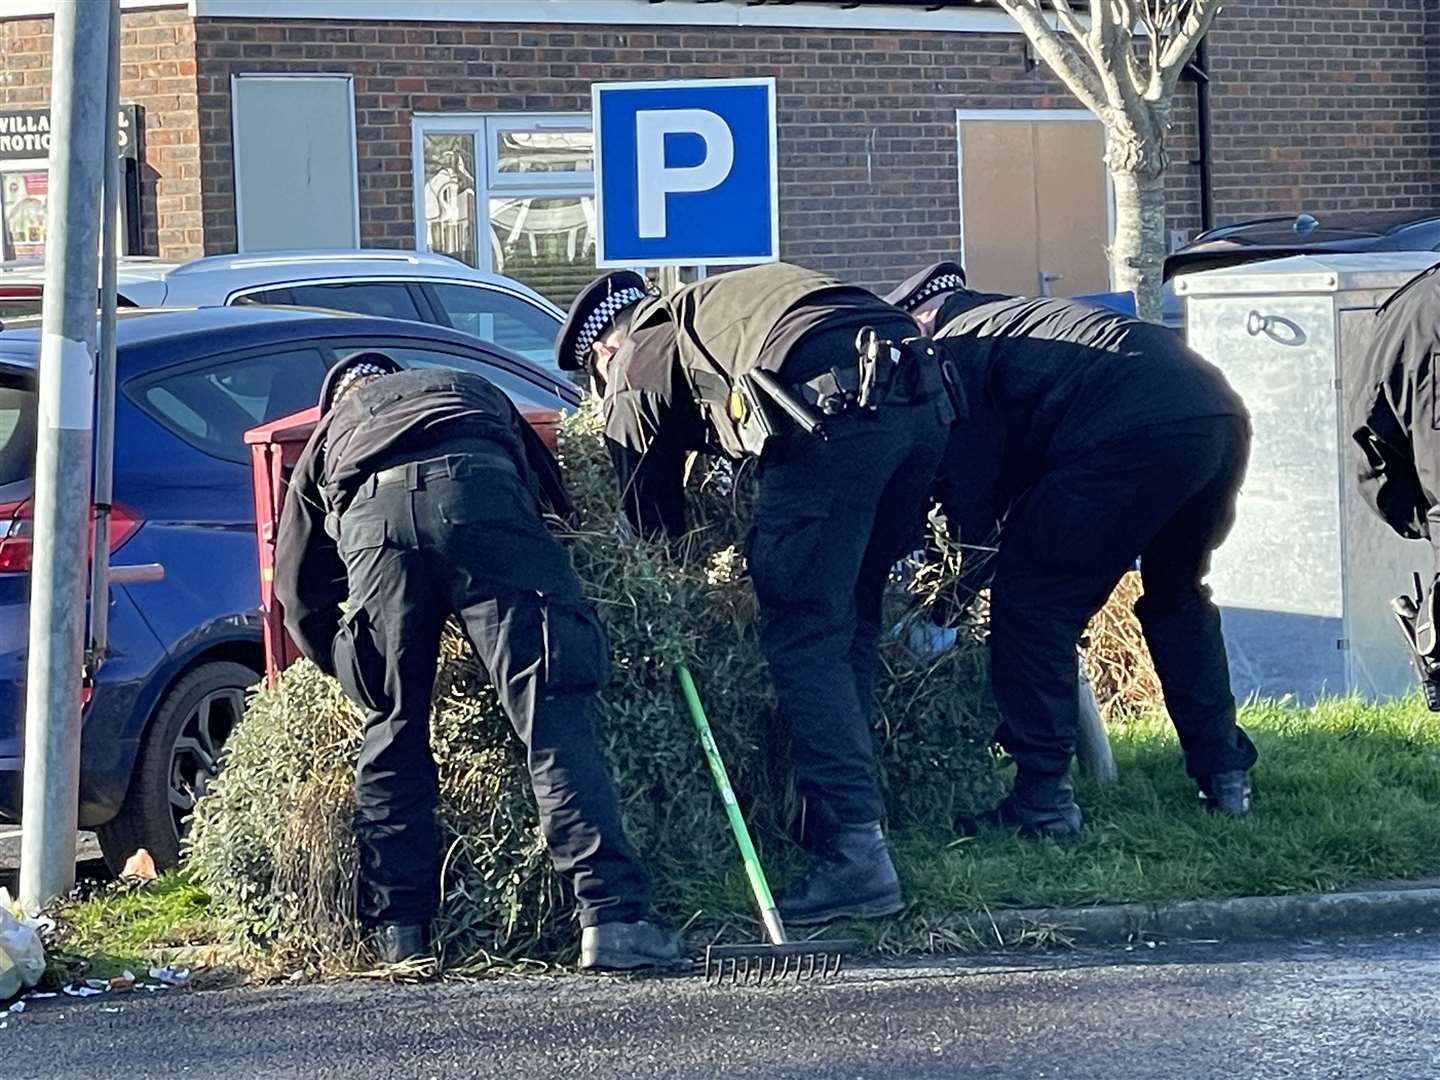 Police are searching the area today